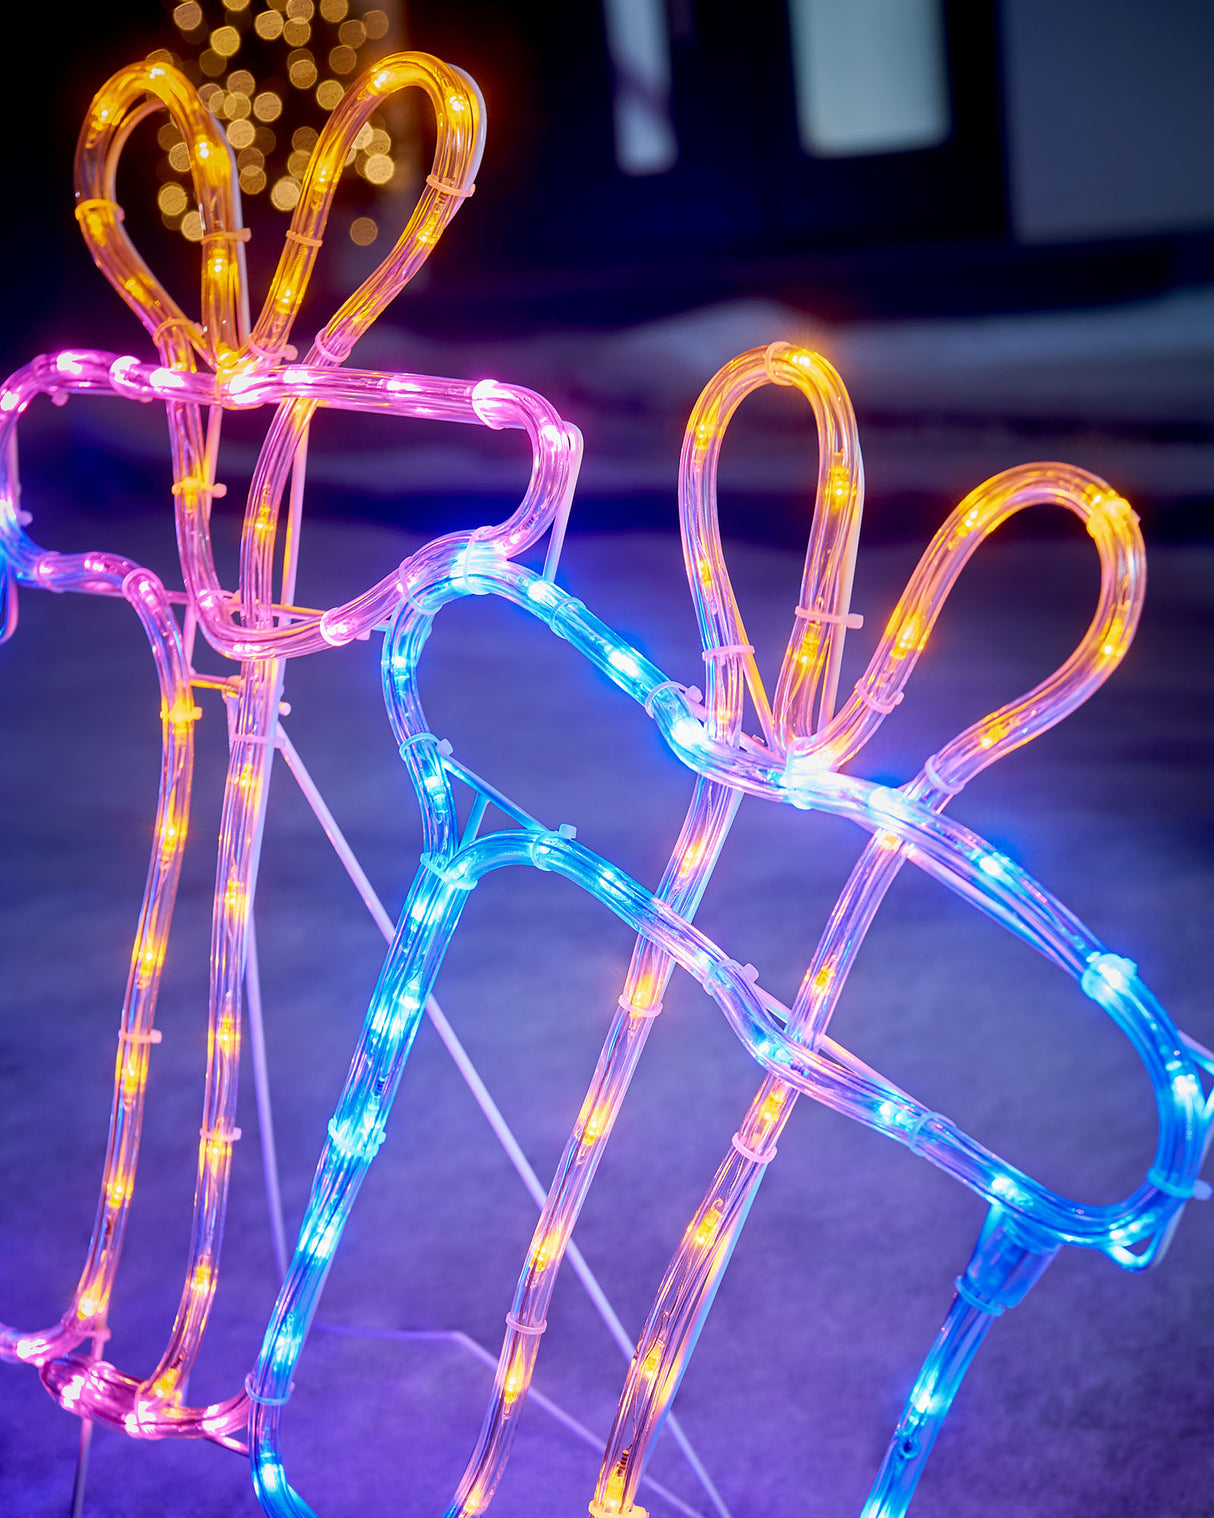 Set of 3 LED Presents Rope Light Silhouette, 99 cm